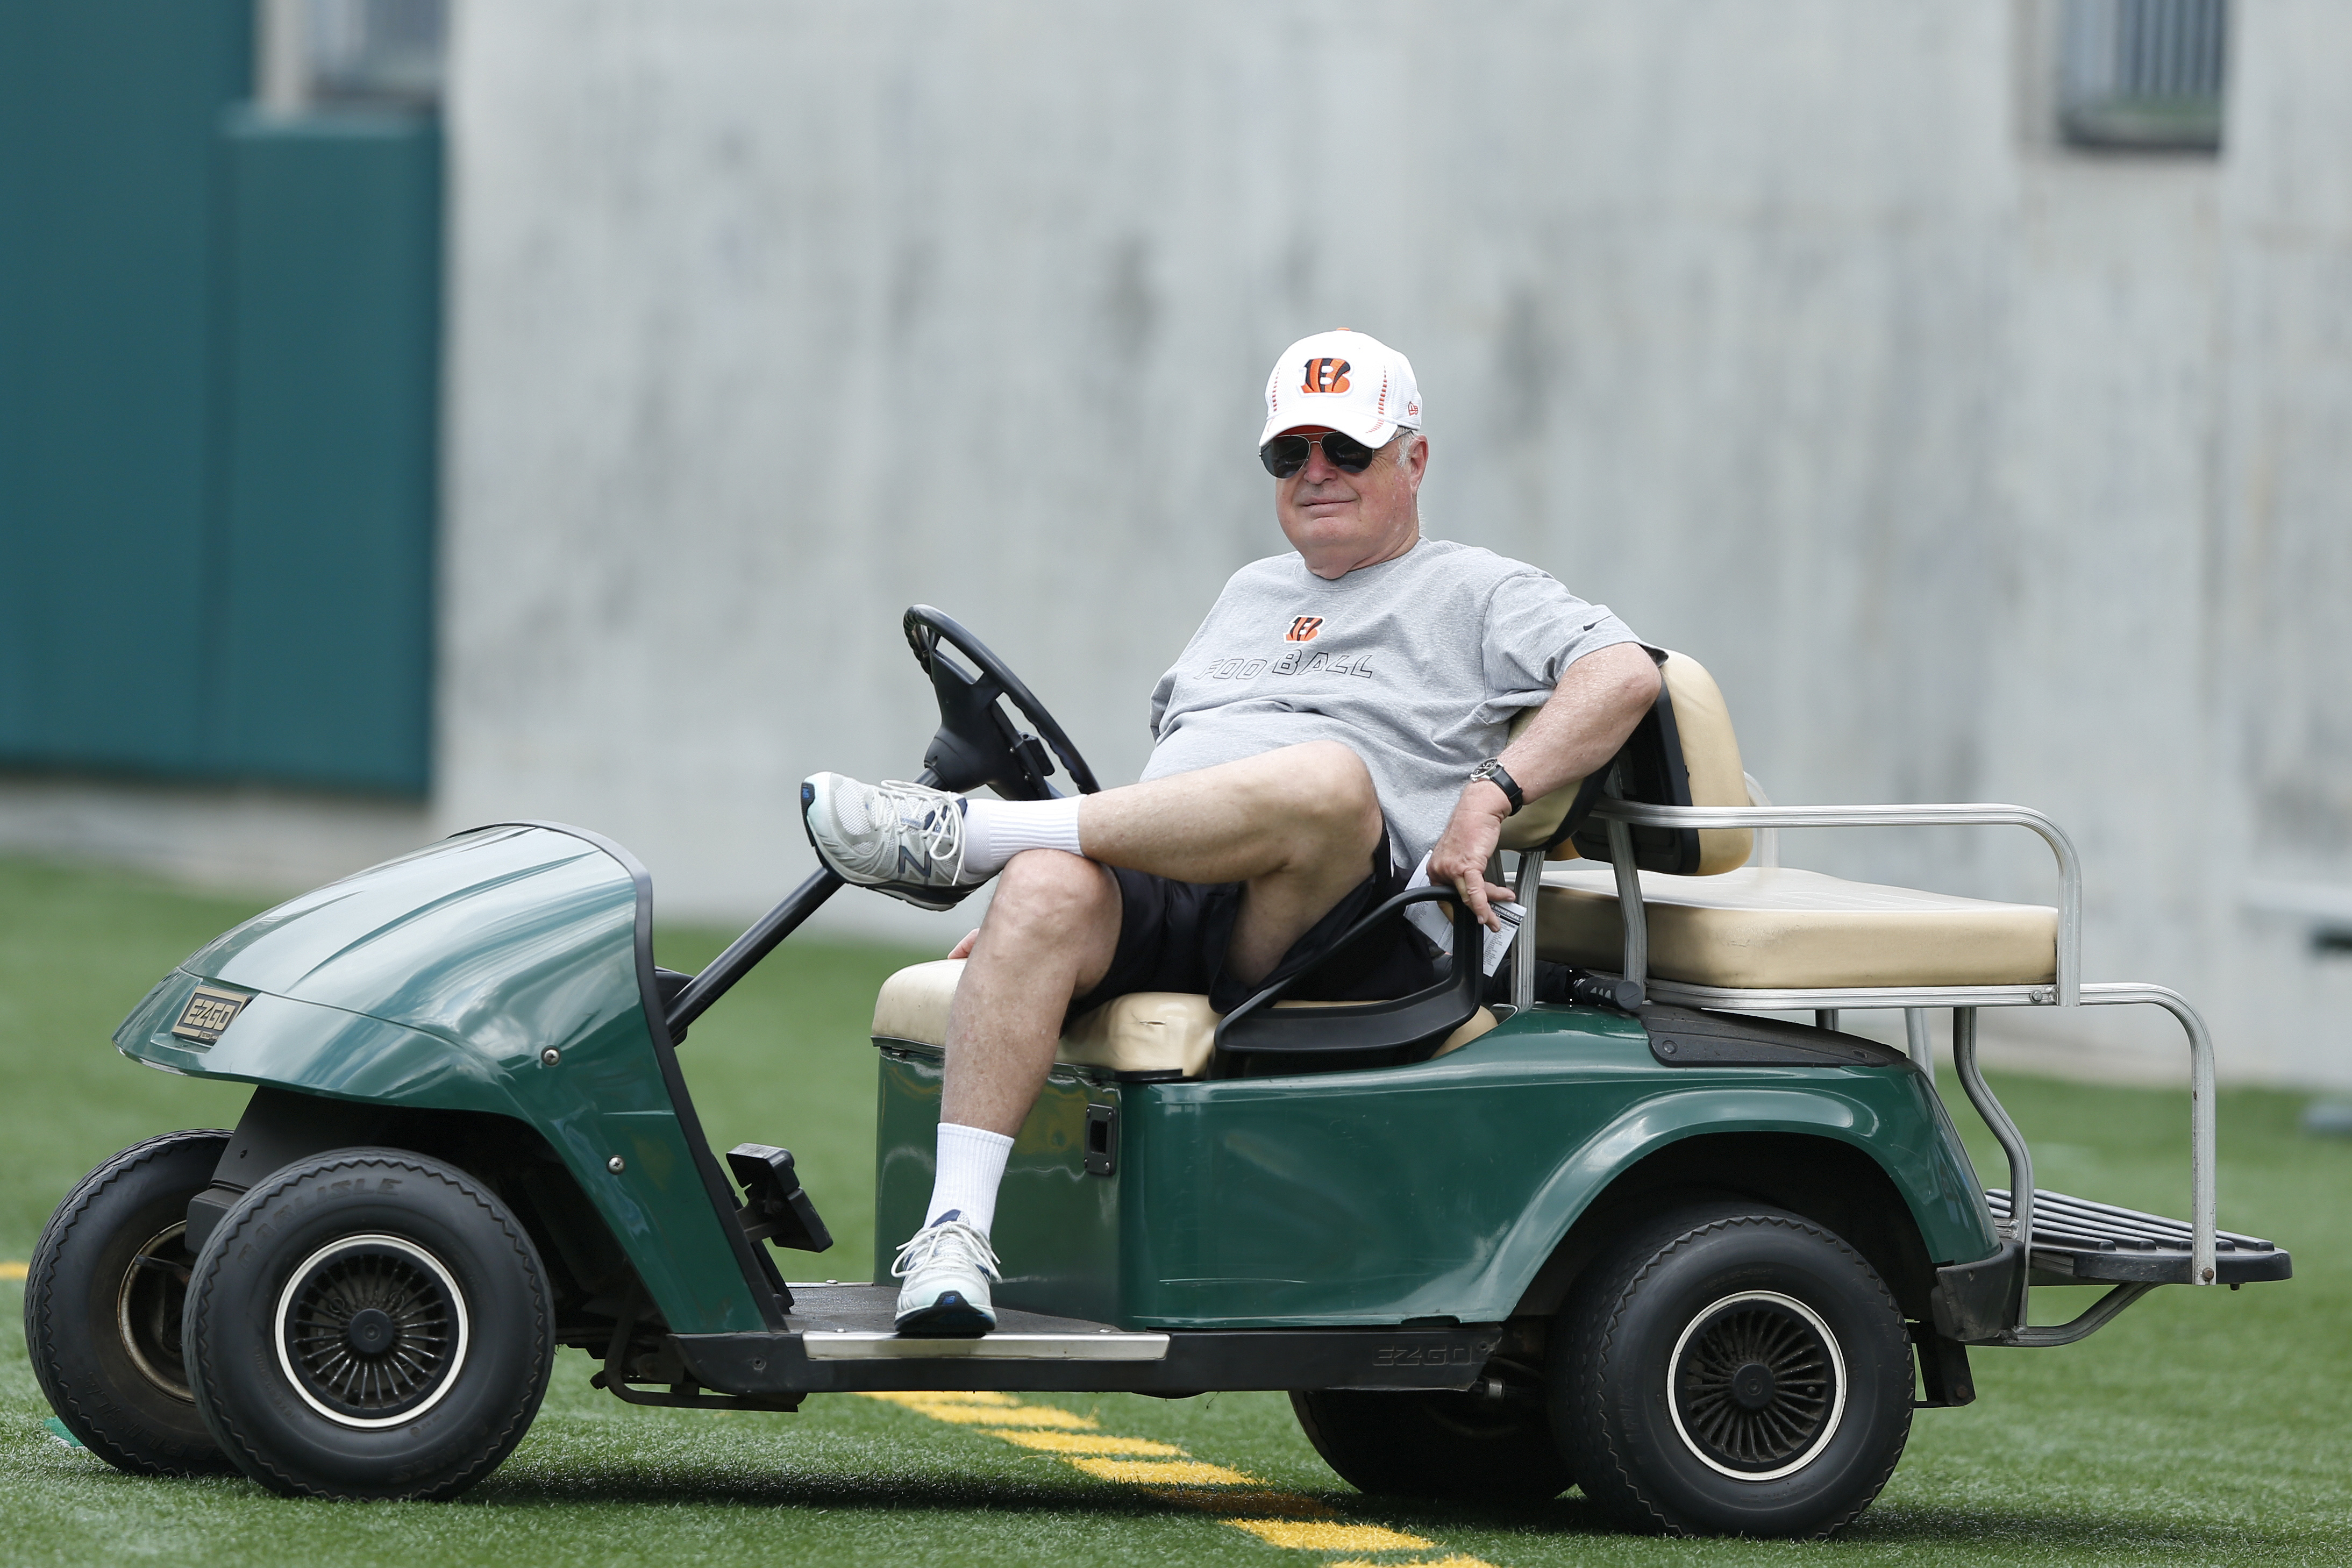 Bengals owner Mike Brown looks on during an organized team activity